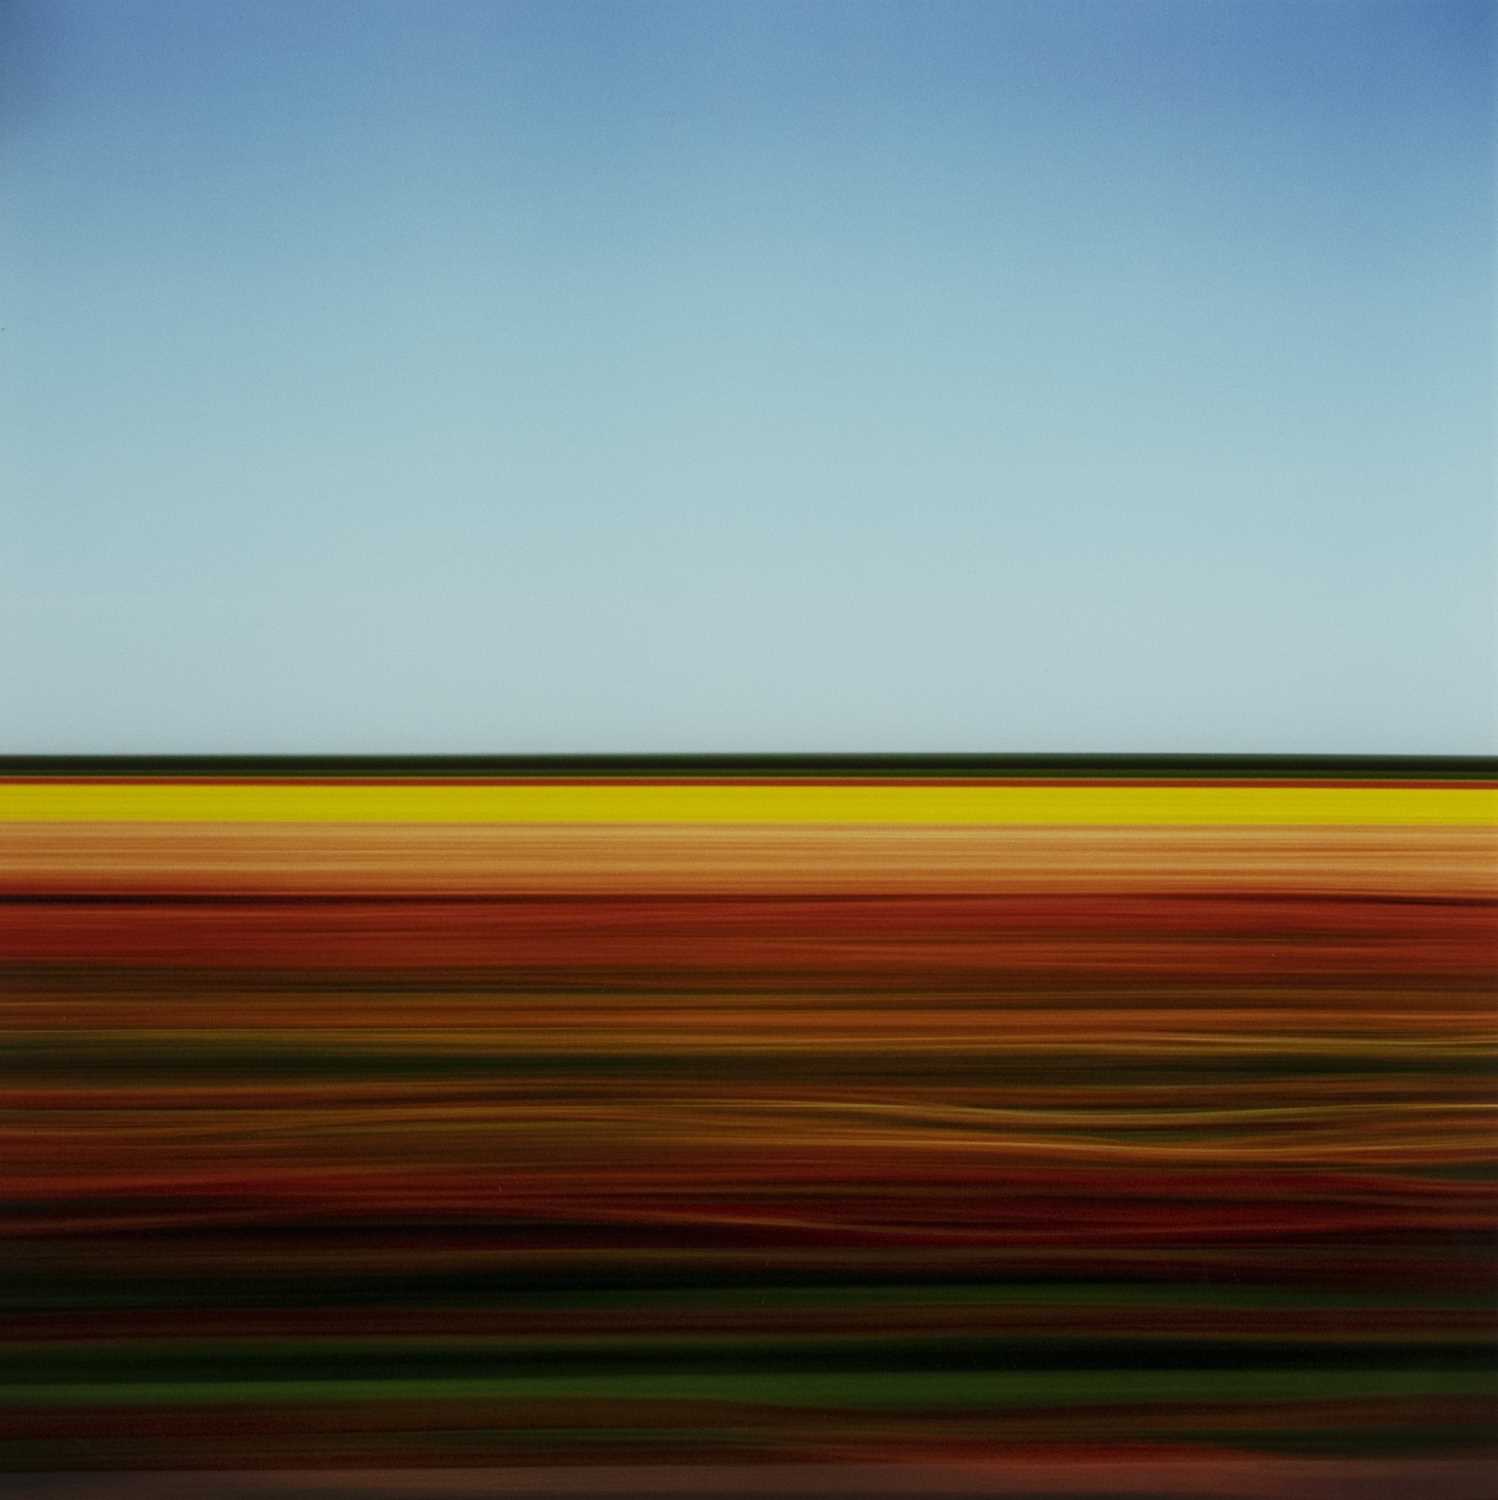 TRAVELLING STILL, TULIP FIELDS XCII, HOLLAND 2006, A PRINT BY ROB CARTER